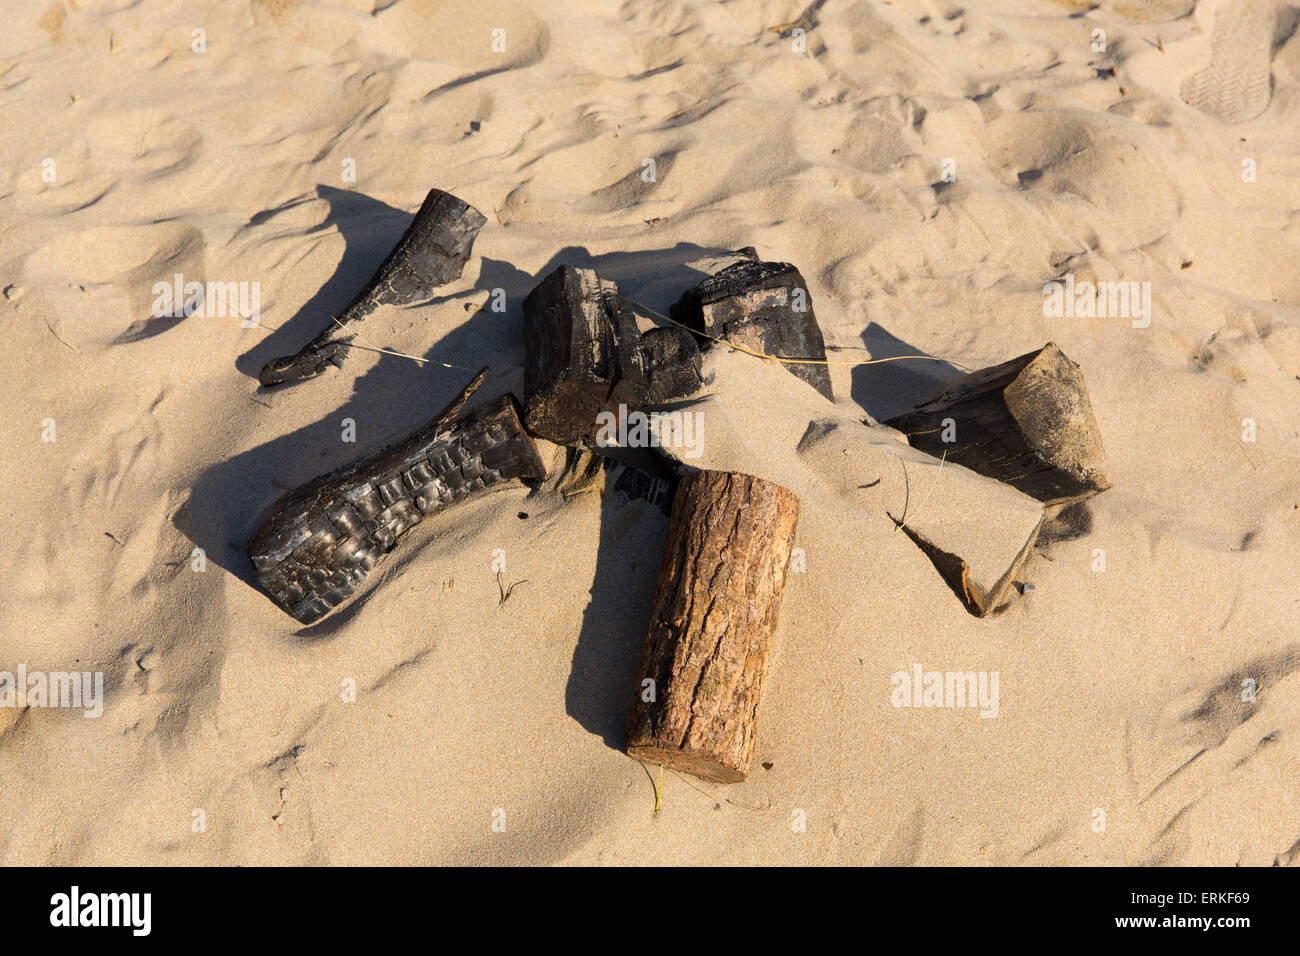 Remains of a small campfire with burned wood logs and sand on a beach Stock Photo